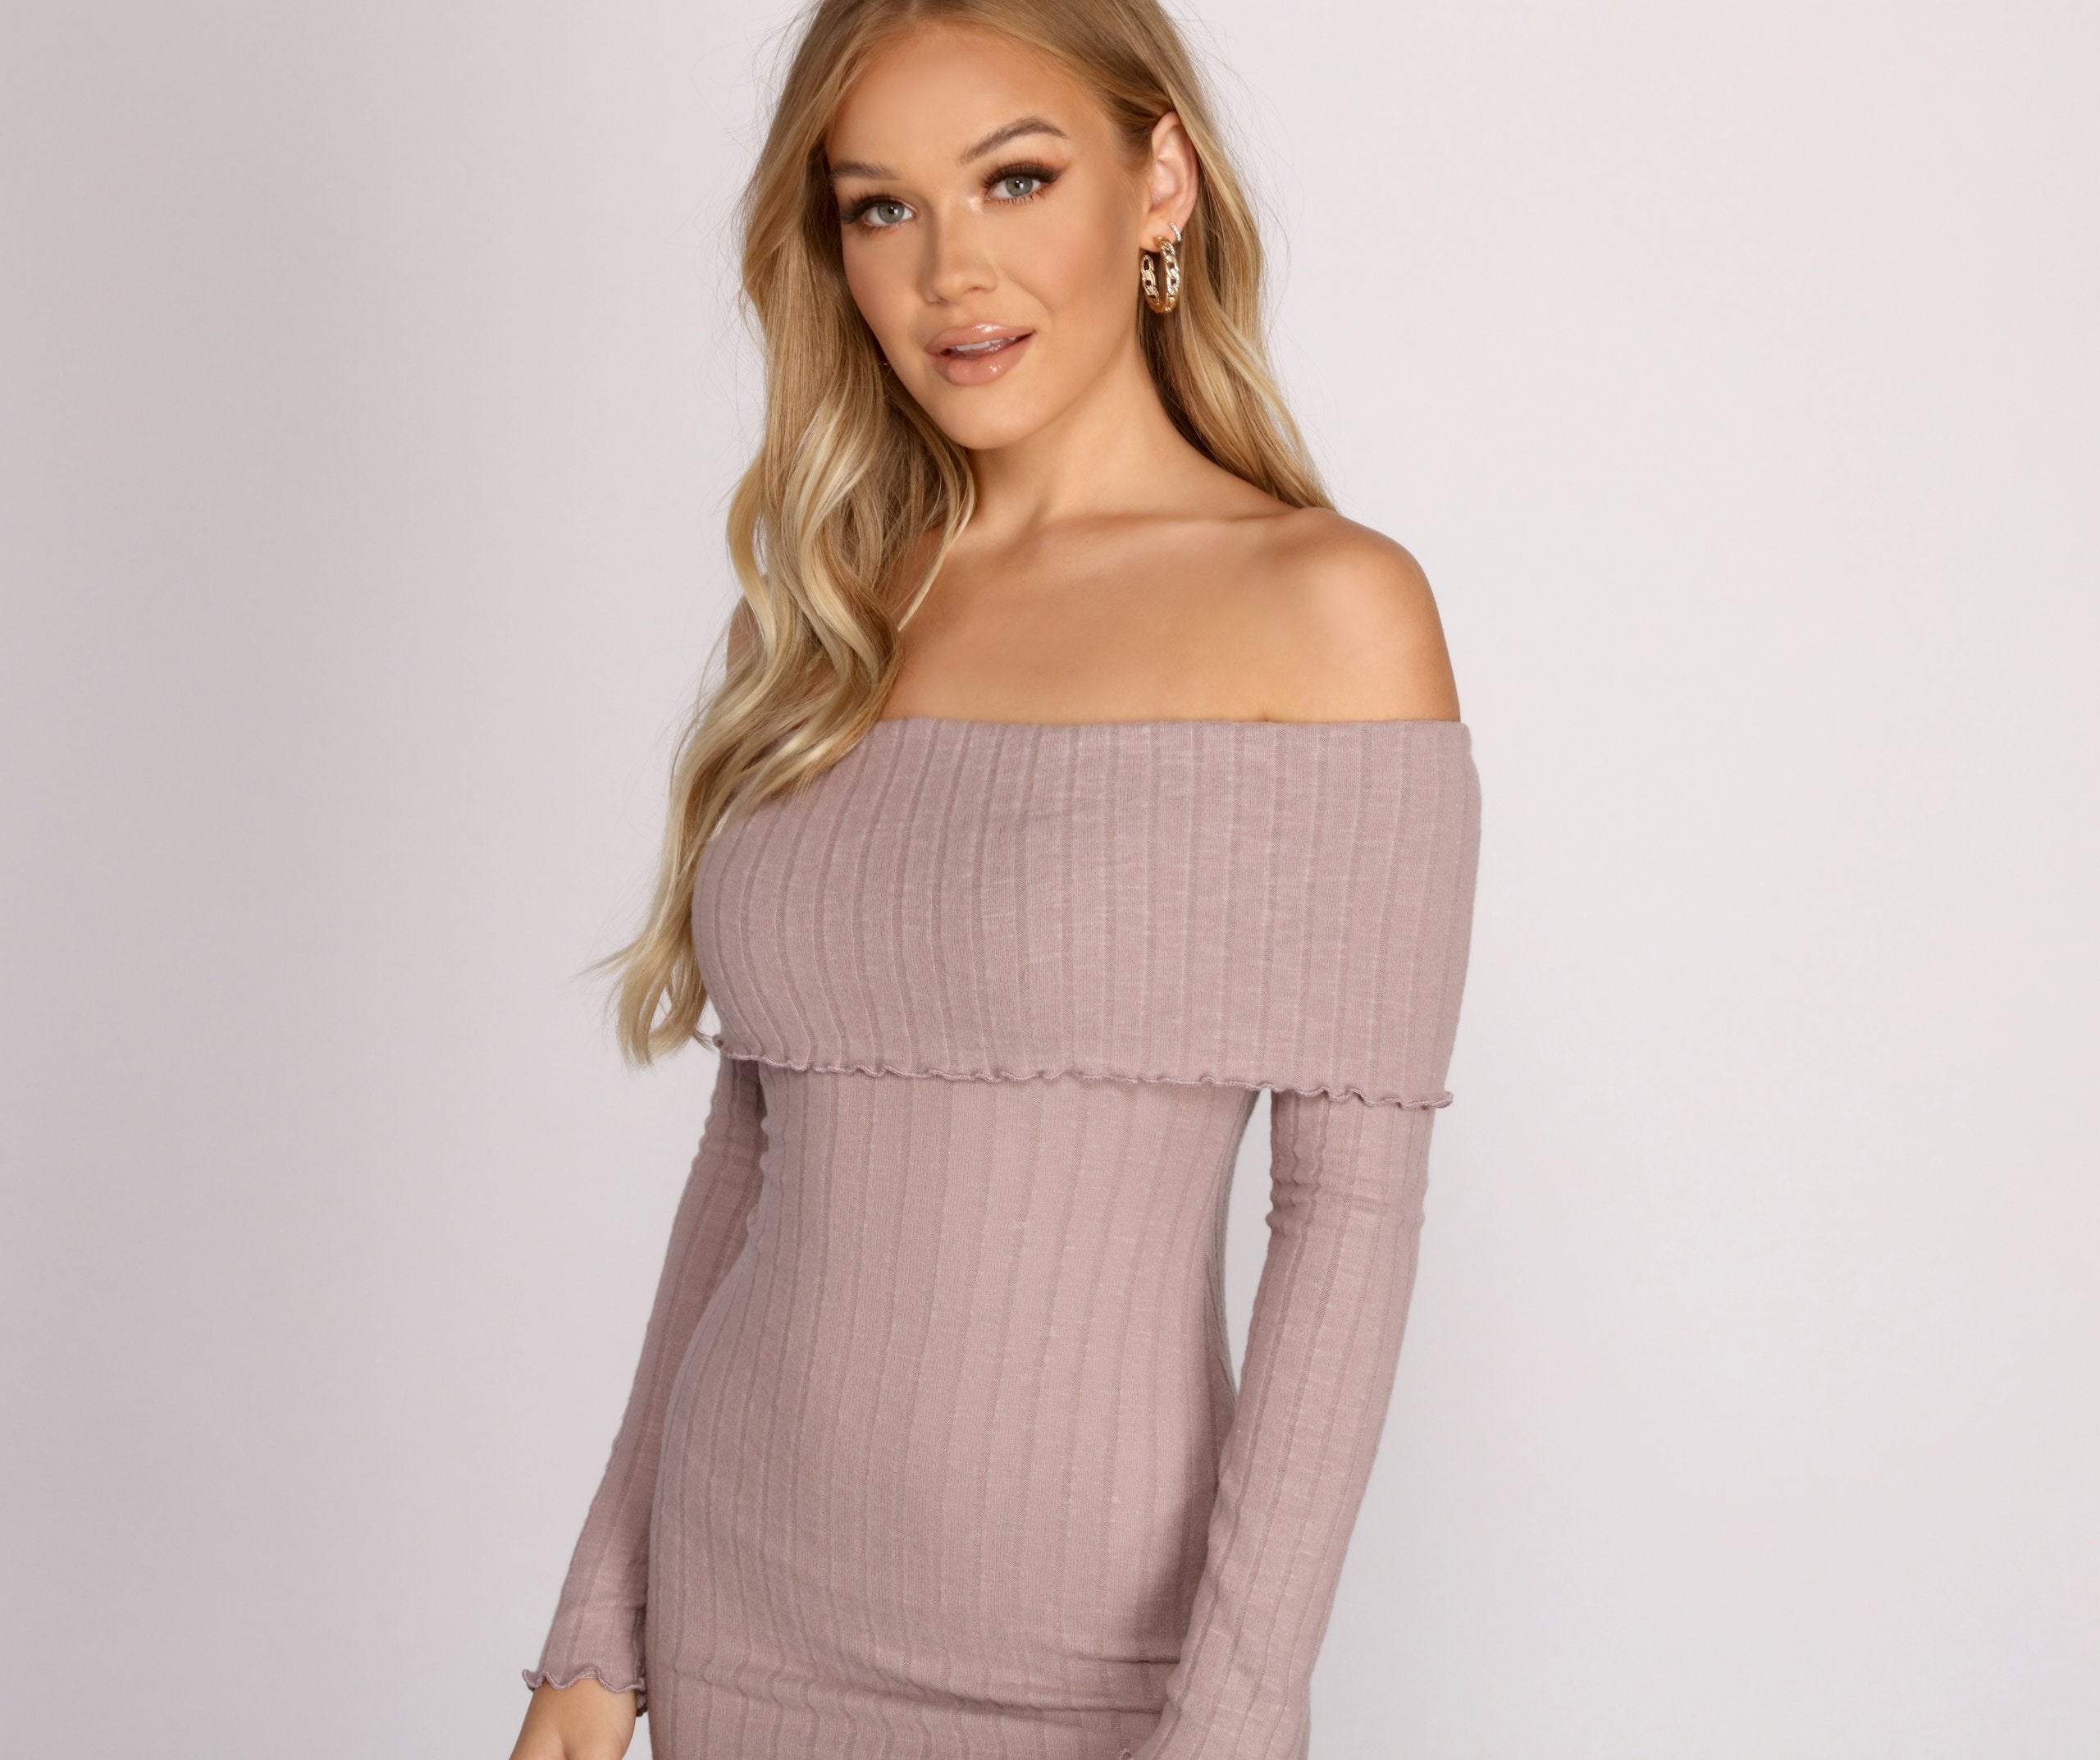 Off The Shoulder Brushed Knit Mini Dress - Lady Occasions